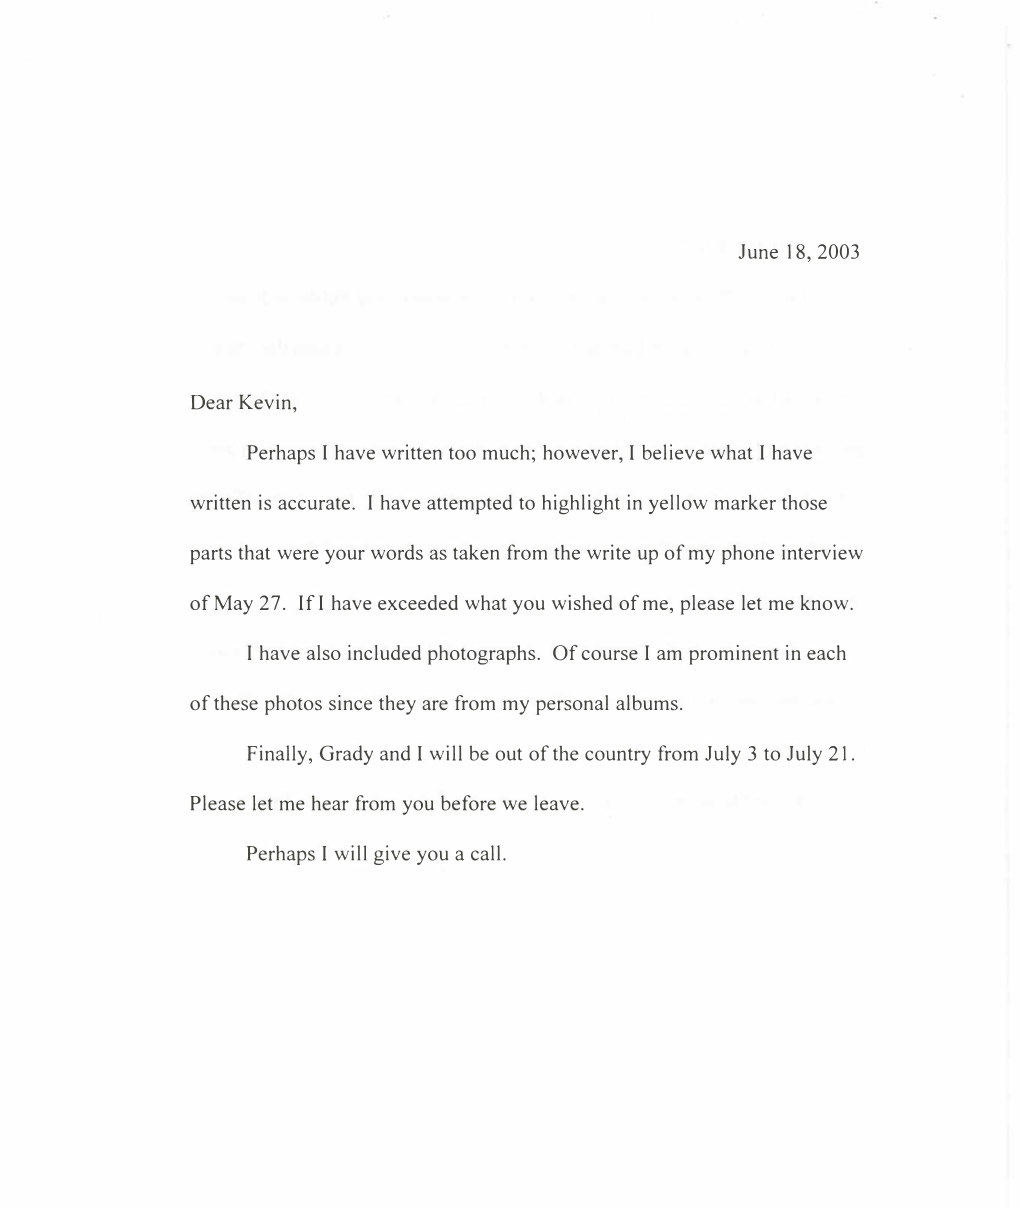 Letter, to Kevin from Dr. Saffy, June 18, 2003